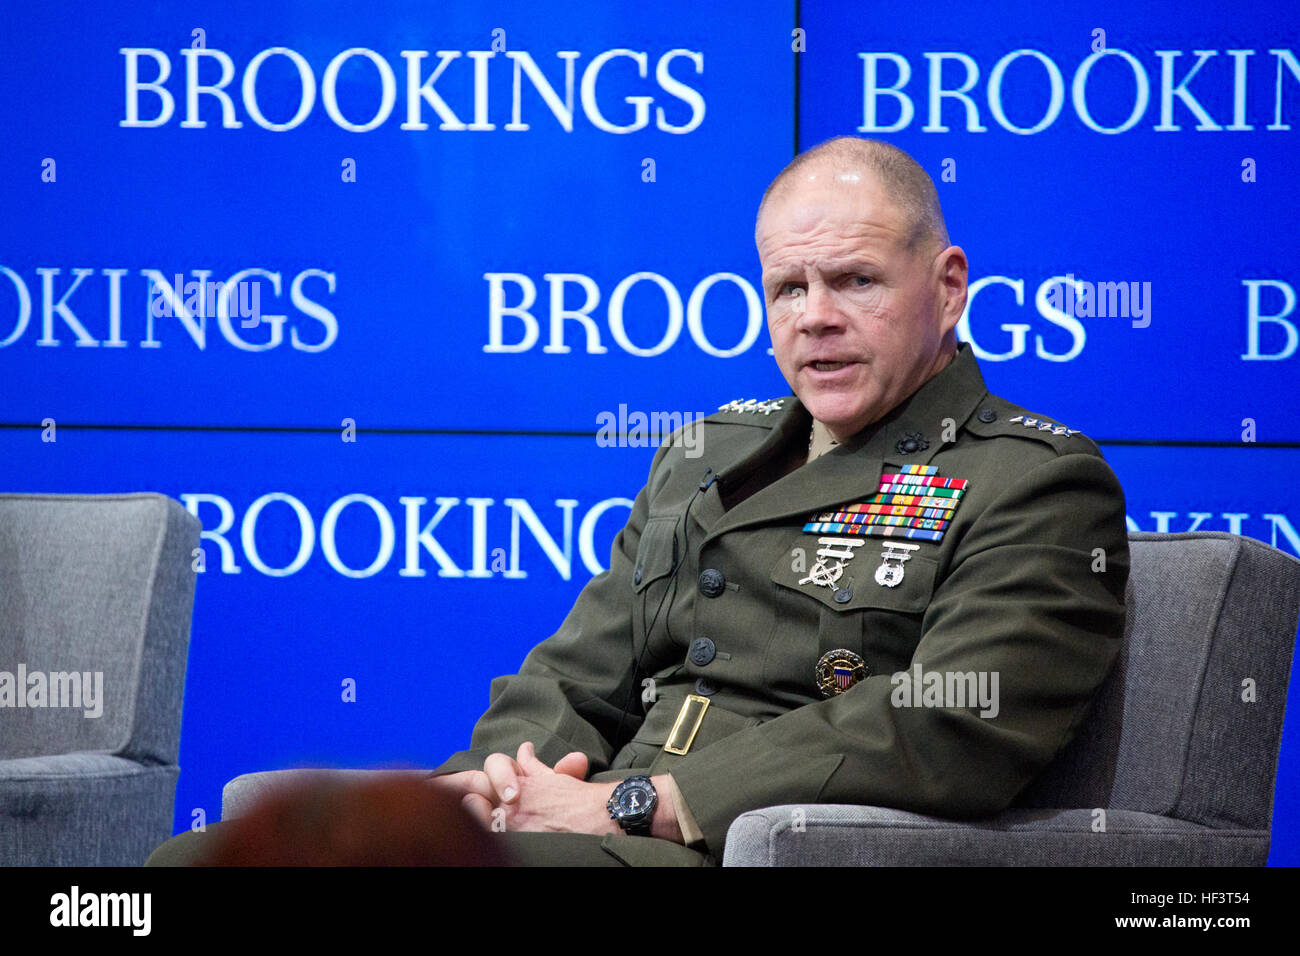 Commandant of the Marine Corps Gen. Robert B. Neller, speaks during an event with the Center for 21st Century Security and Intelligence at the Brookings Institution, Washington, D.C., Feb. 26, 2016. Neller, the Secretary of the Navy Ray Mabus, and Chief of Naval Operations Adm. John M. Richardson discussed the future maritime concepts, strategies and technologies with Michael O'Hanlon as the moderator. (U.S. Marine Corps photo by Staff Sgt. Gabriela Garcia/Released) CMC at Brookings 160226-M-SA716-042 Stock Photo